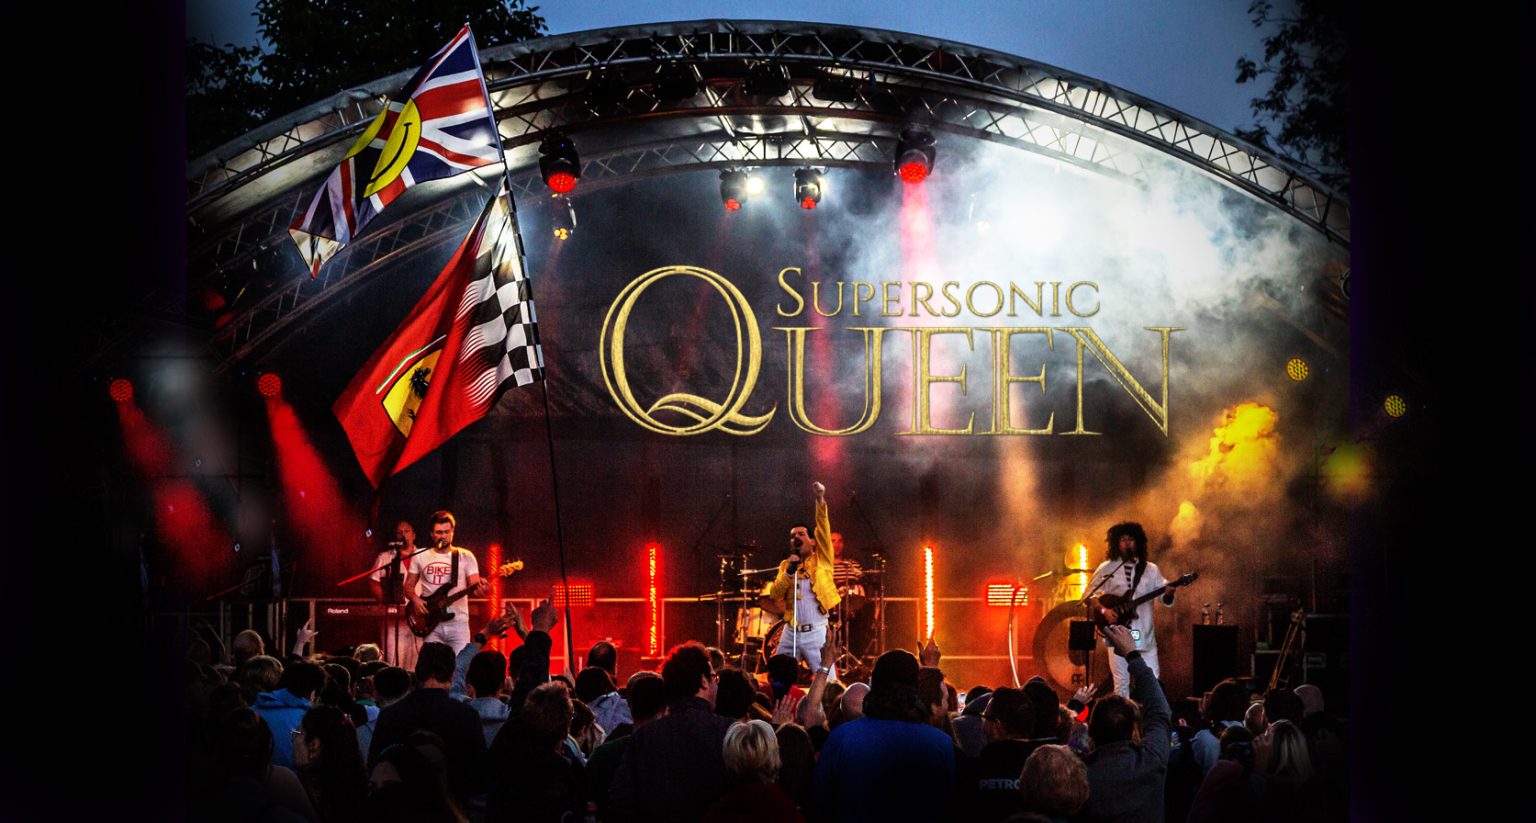 Queen Tribute Band